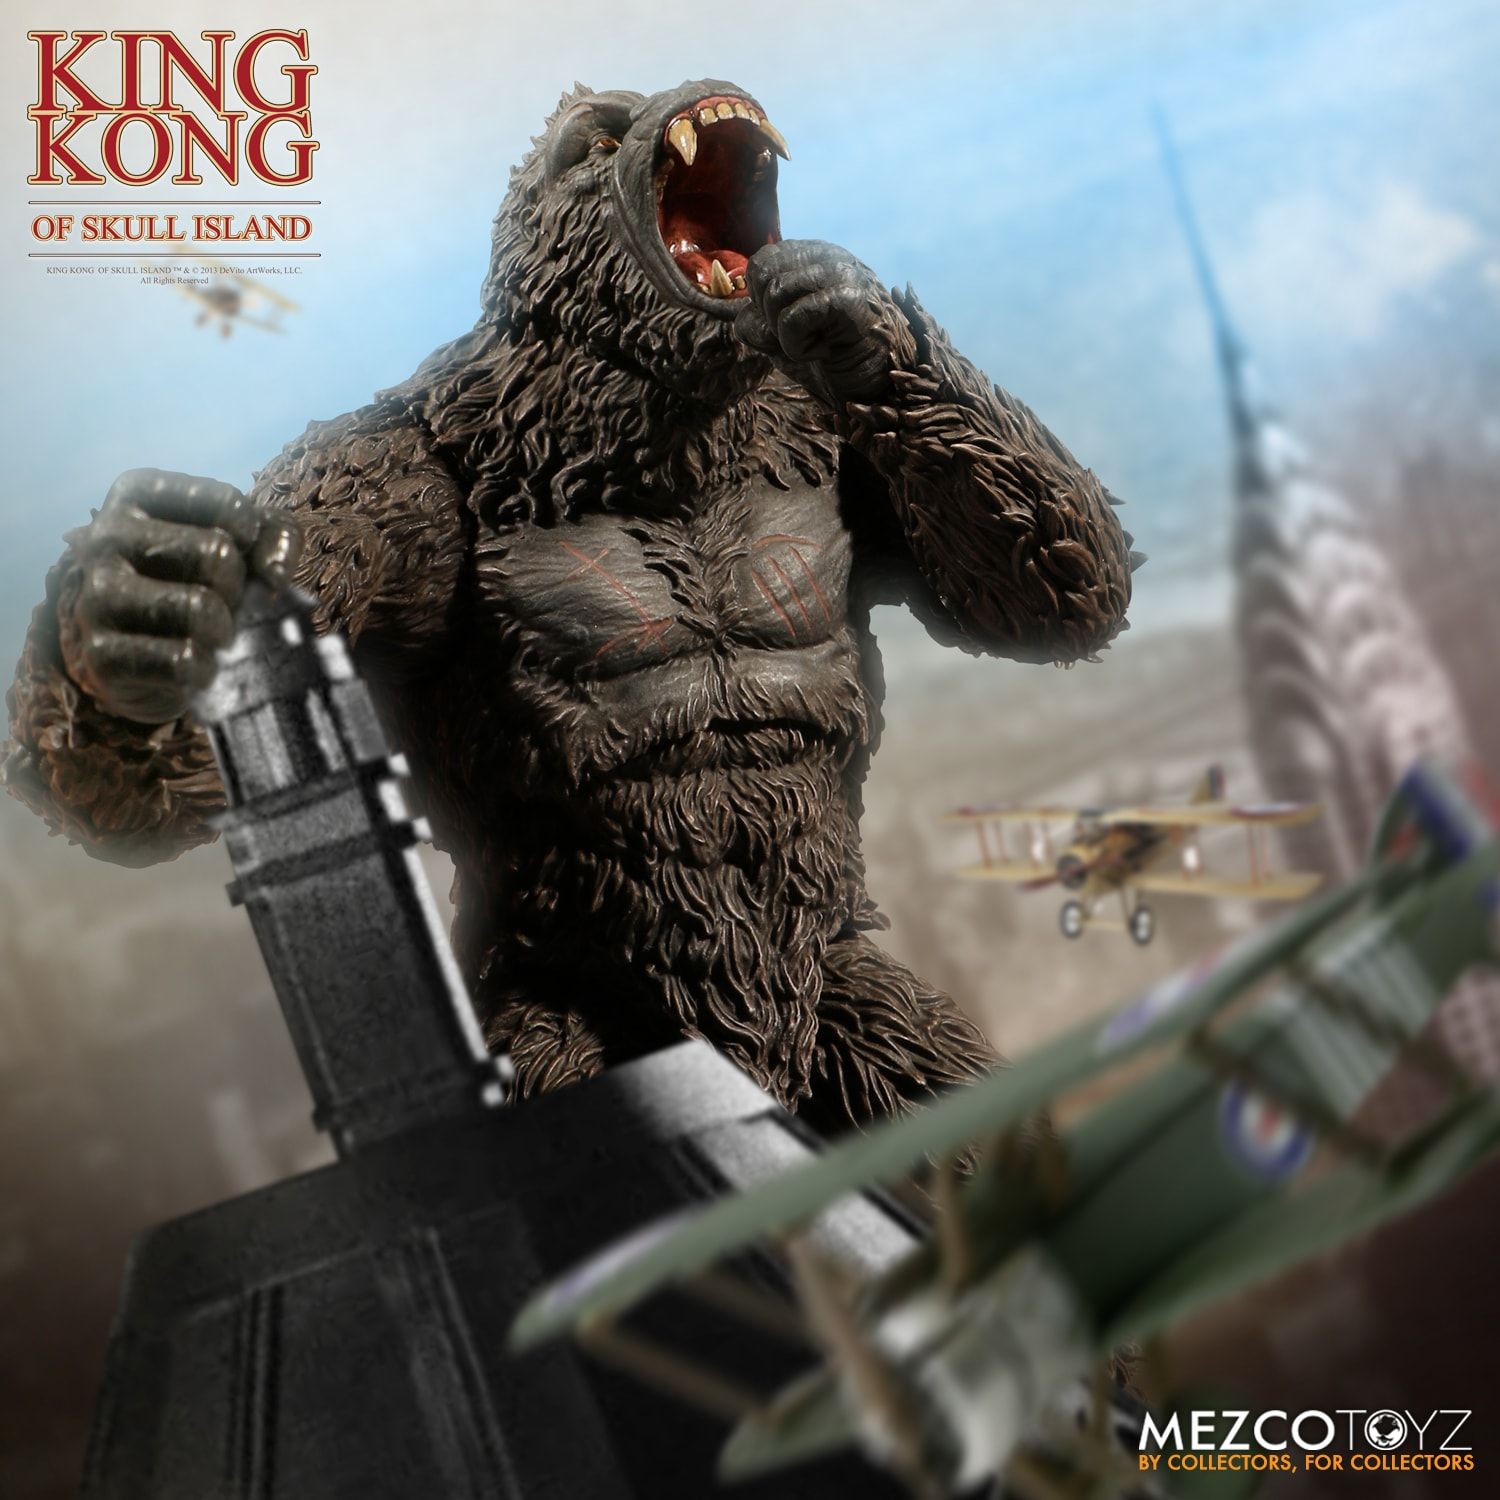 King Kong Mezco Kong of Skull Island 7" Scale Action Figure IN STOCK 